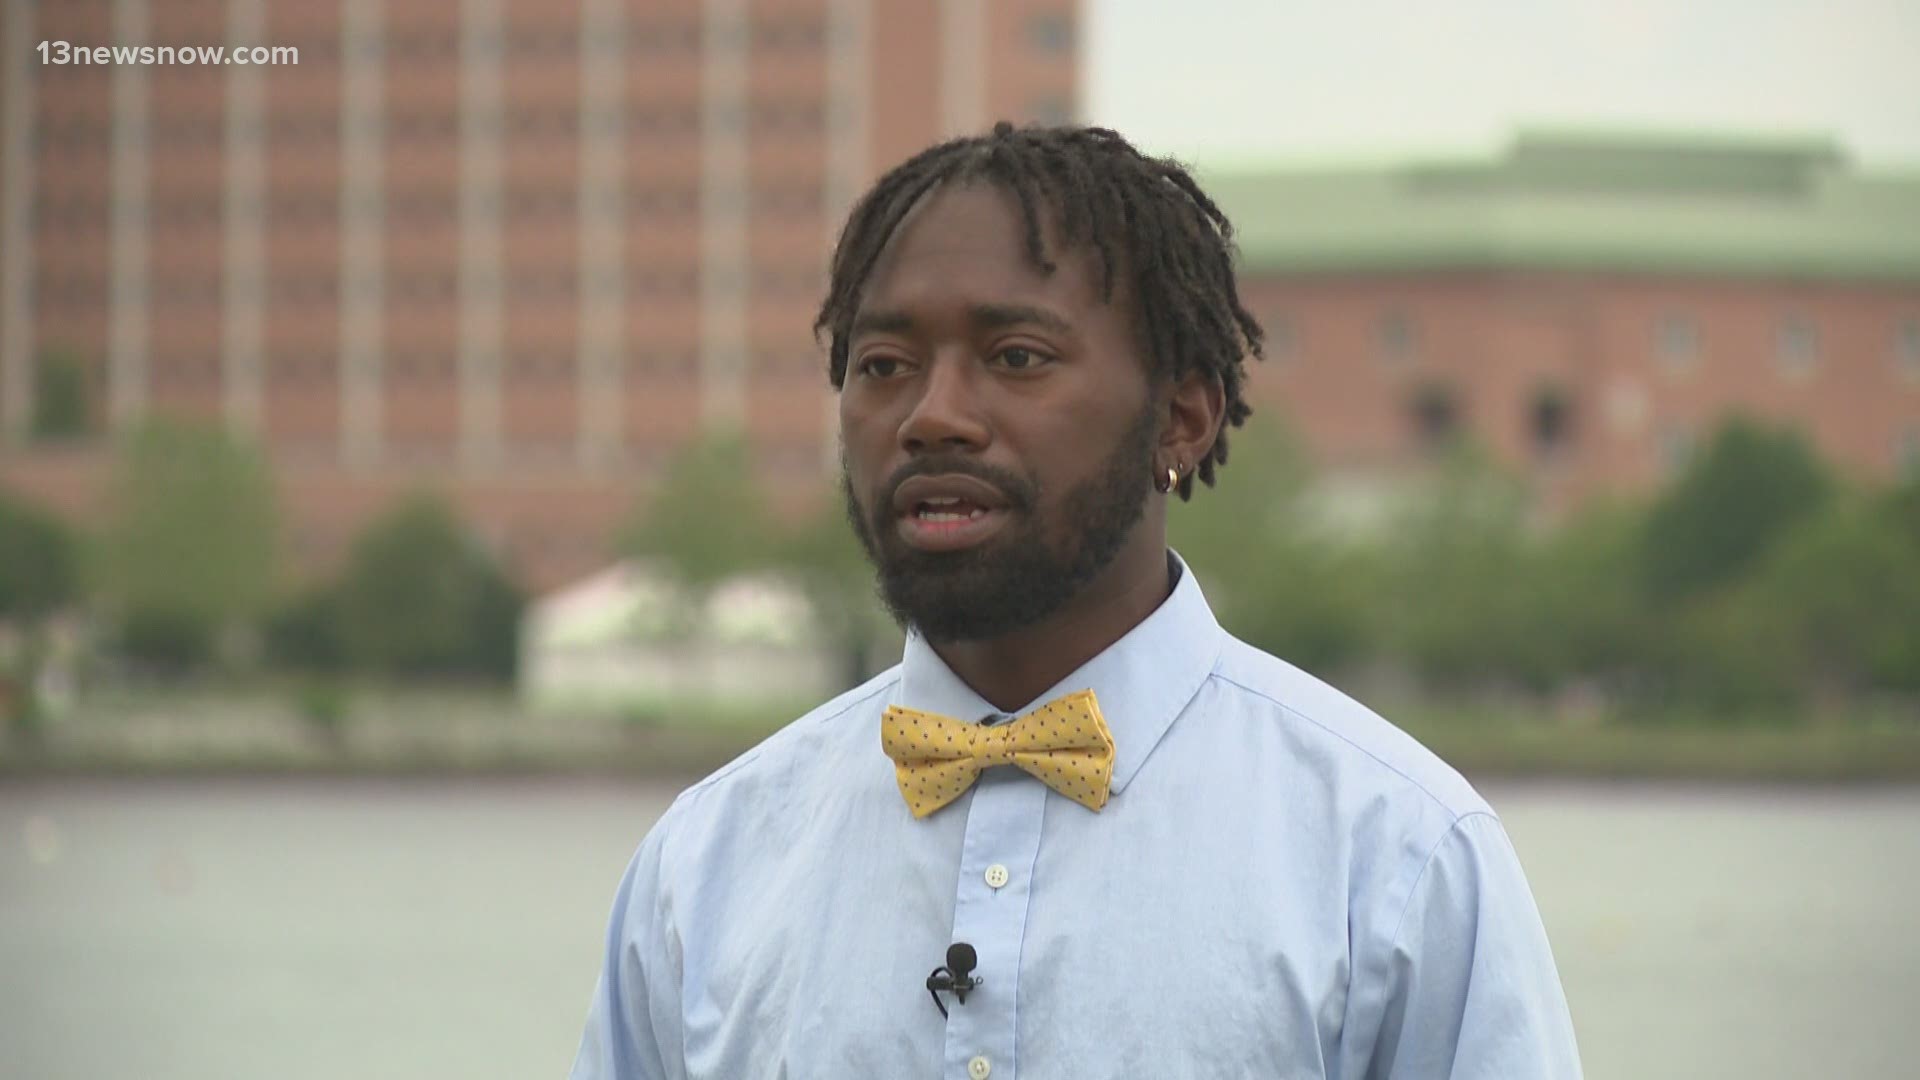 Nadarius Clark has stepped into the civic spotlight in Portsmouth.